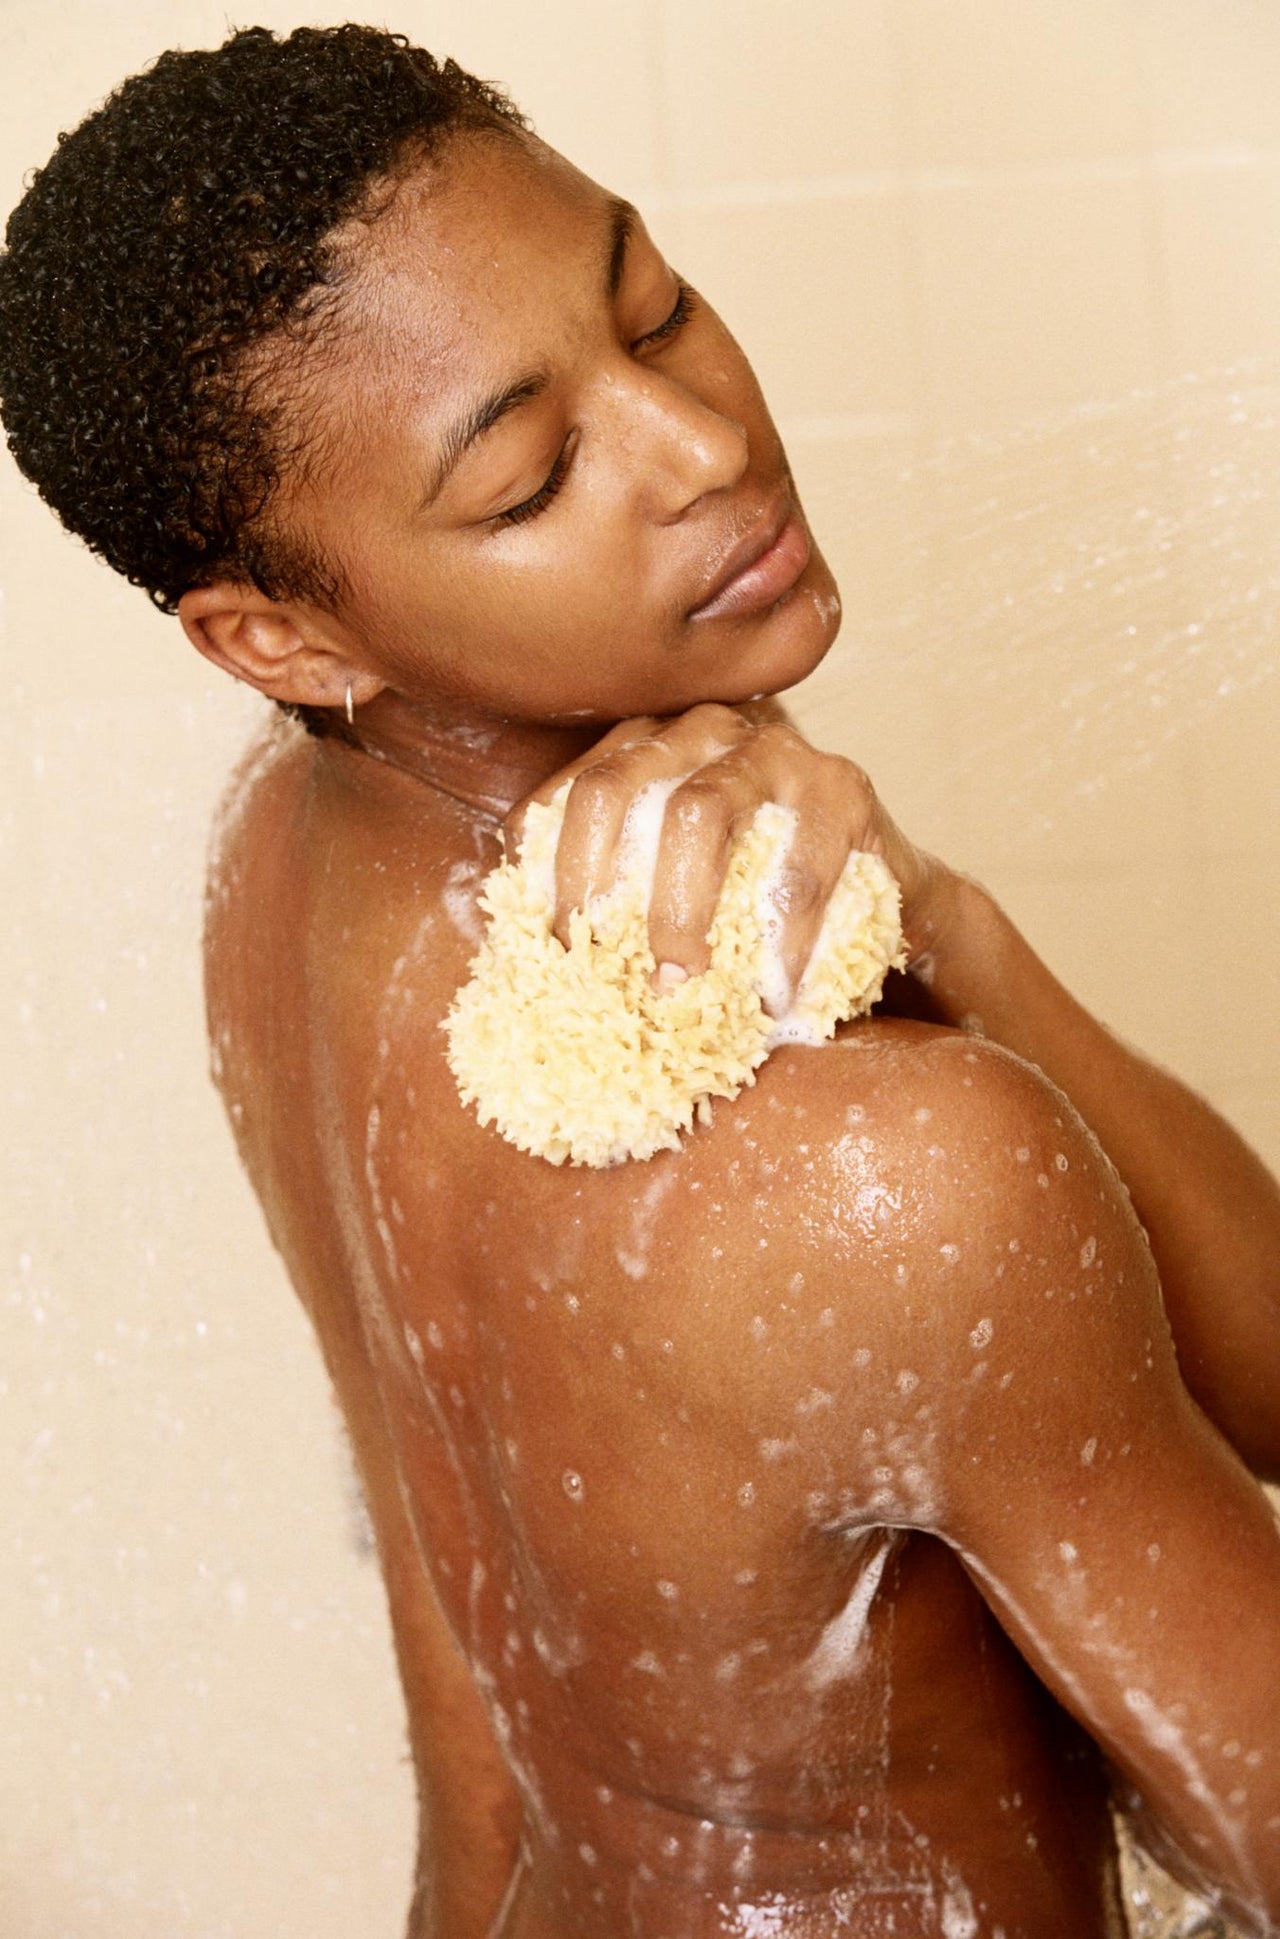 You Don't Have to Shower Every Day, Dermatologists Say